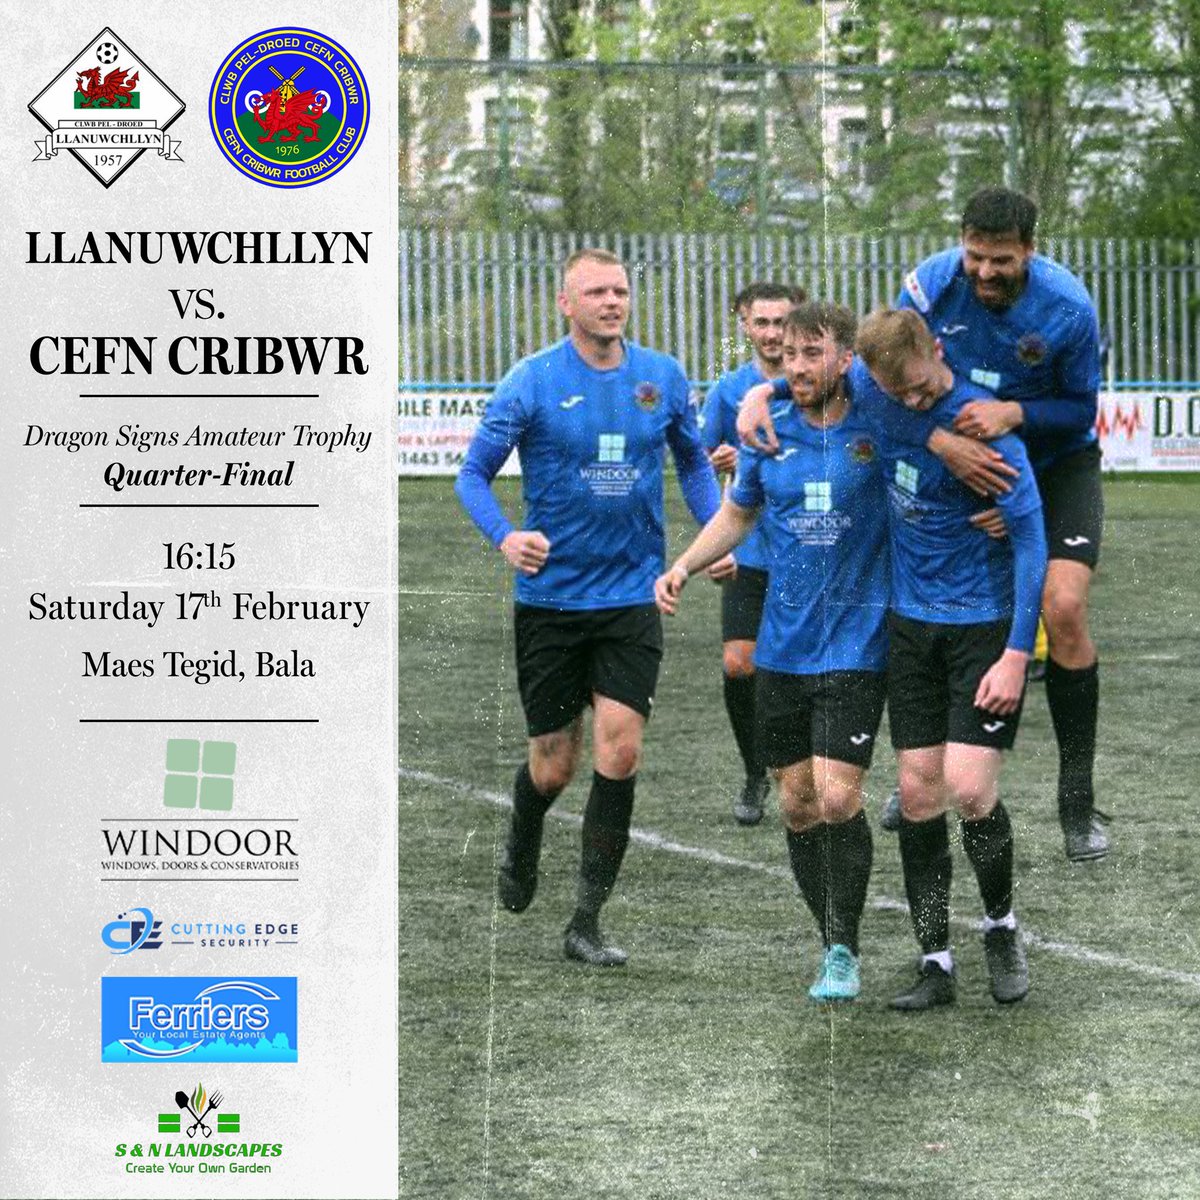 🏟️ DIWEDDARIAD STADIWM

Following a pitch inspection at Llanuwchllyn, tomorrow’s Amateur Trophy quarter-final fixture will now be played at @BalaTownFC’s Maes Tegid at the later time of 4:15pm!

#Riders